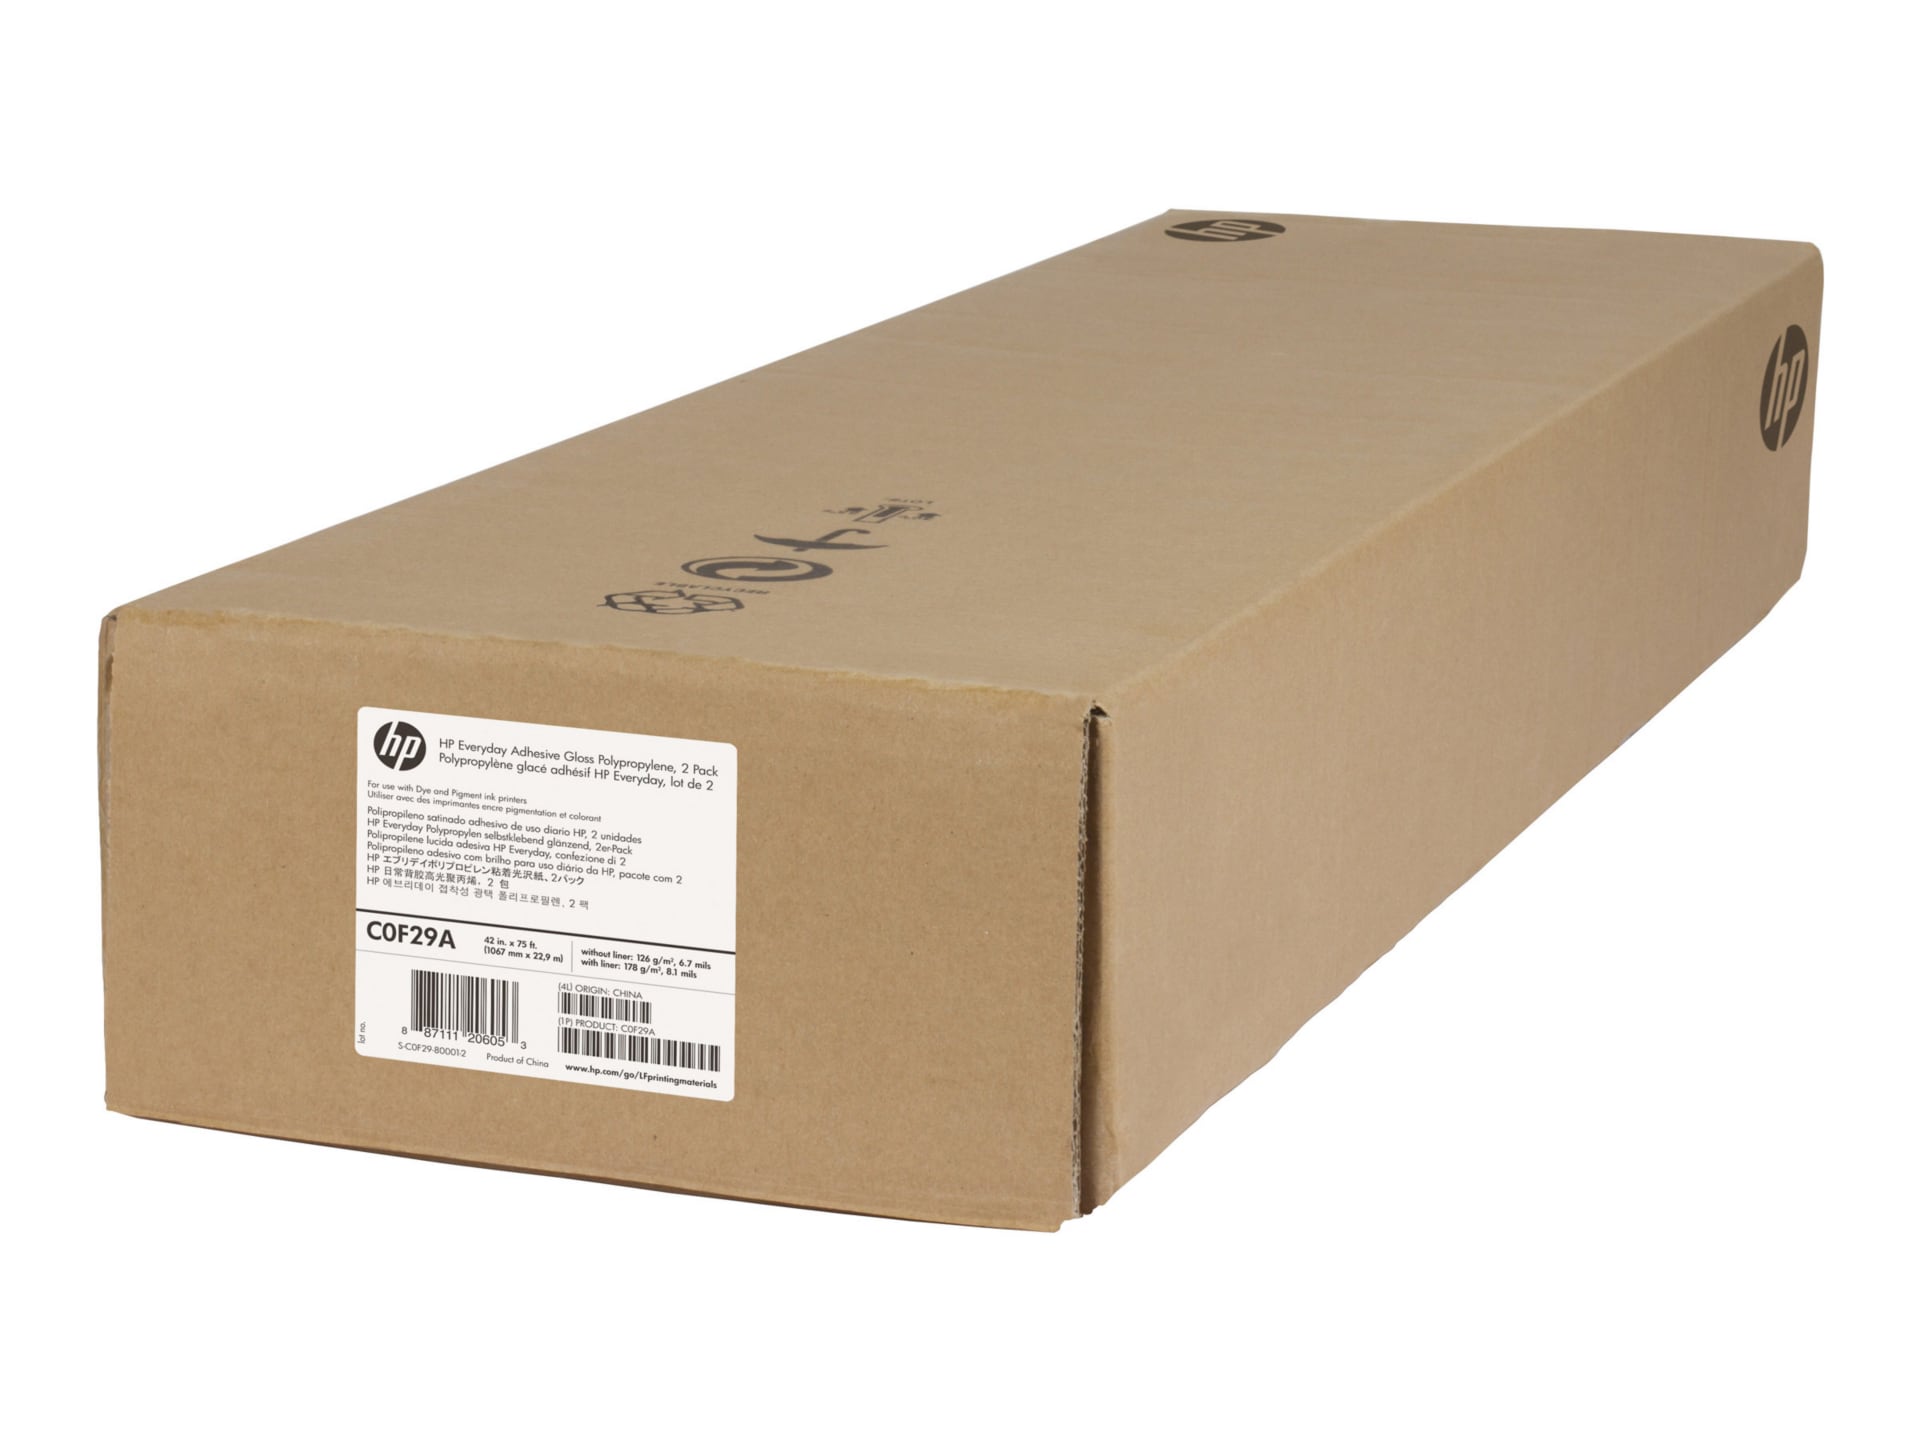 HP 2-Pack Everyday Adhesive Gloss Polypropylene-1067 mm x 22,9 m (42 in x 7